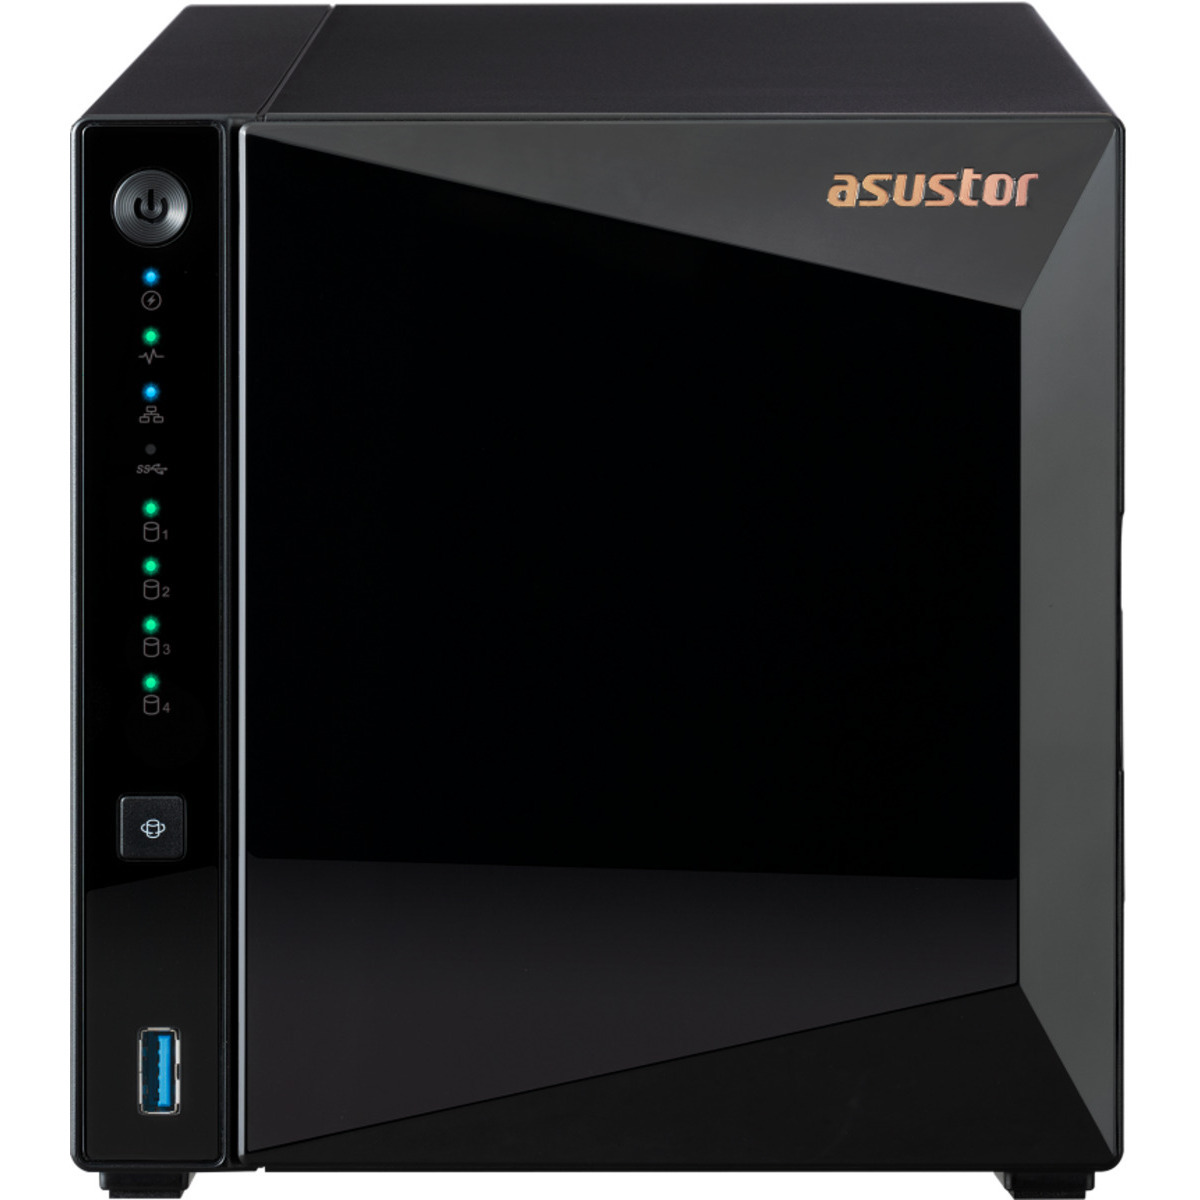 ASUSTOR DRIVESTOR 4 Pro AS3304T 64tb 4-Bay Desktop Personal / Basic Home / Small Office NAS - Network Attached Storage Device 4x16tb Seagate IronWolf Pro ST16000NT001 3.5 7200rpm SATA 6Gb/s HDD NAS Class Drives Installed - Burn-In Tested - ON SALE DRIVESTOR 4 Pro AS3304T